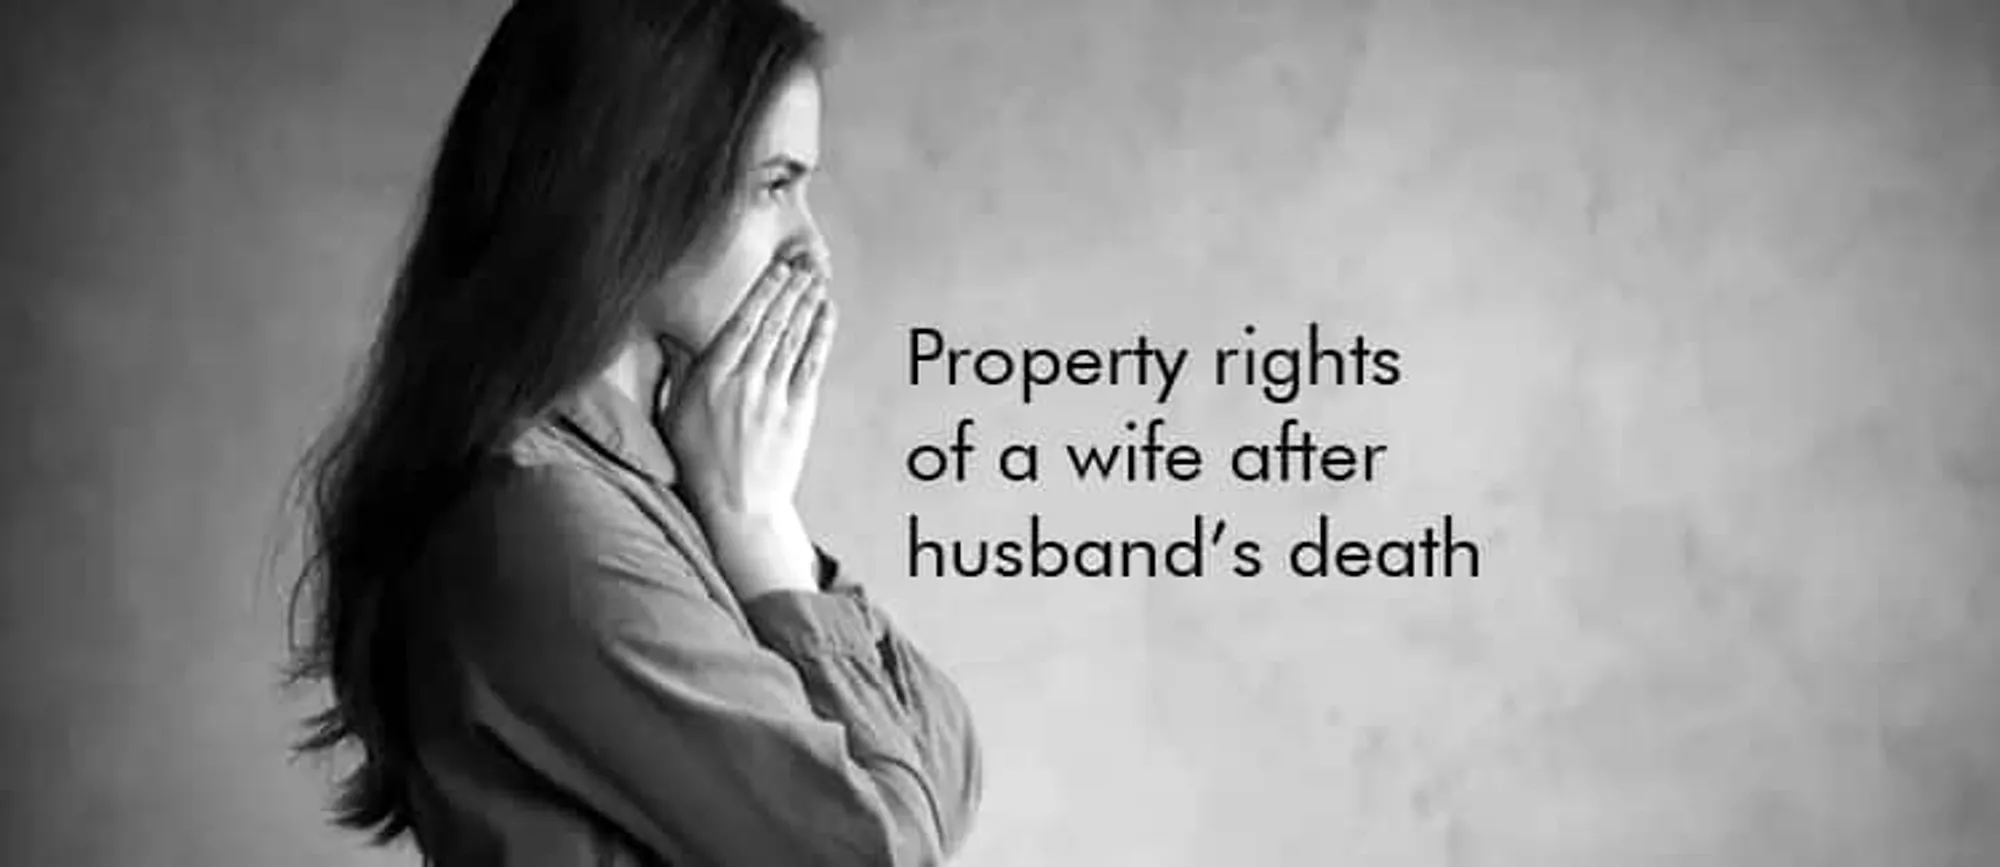 Property rights of a wife after husband's death